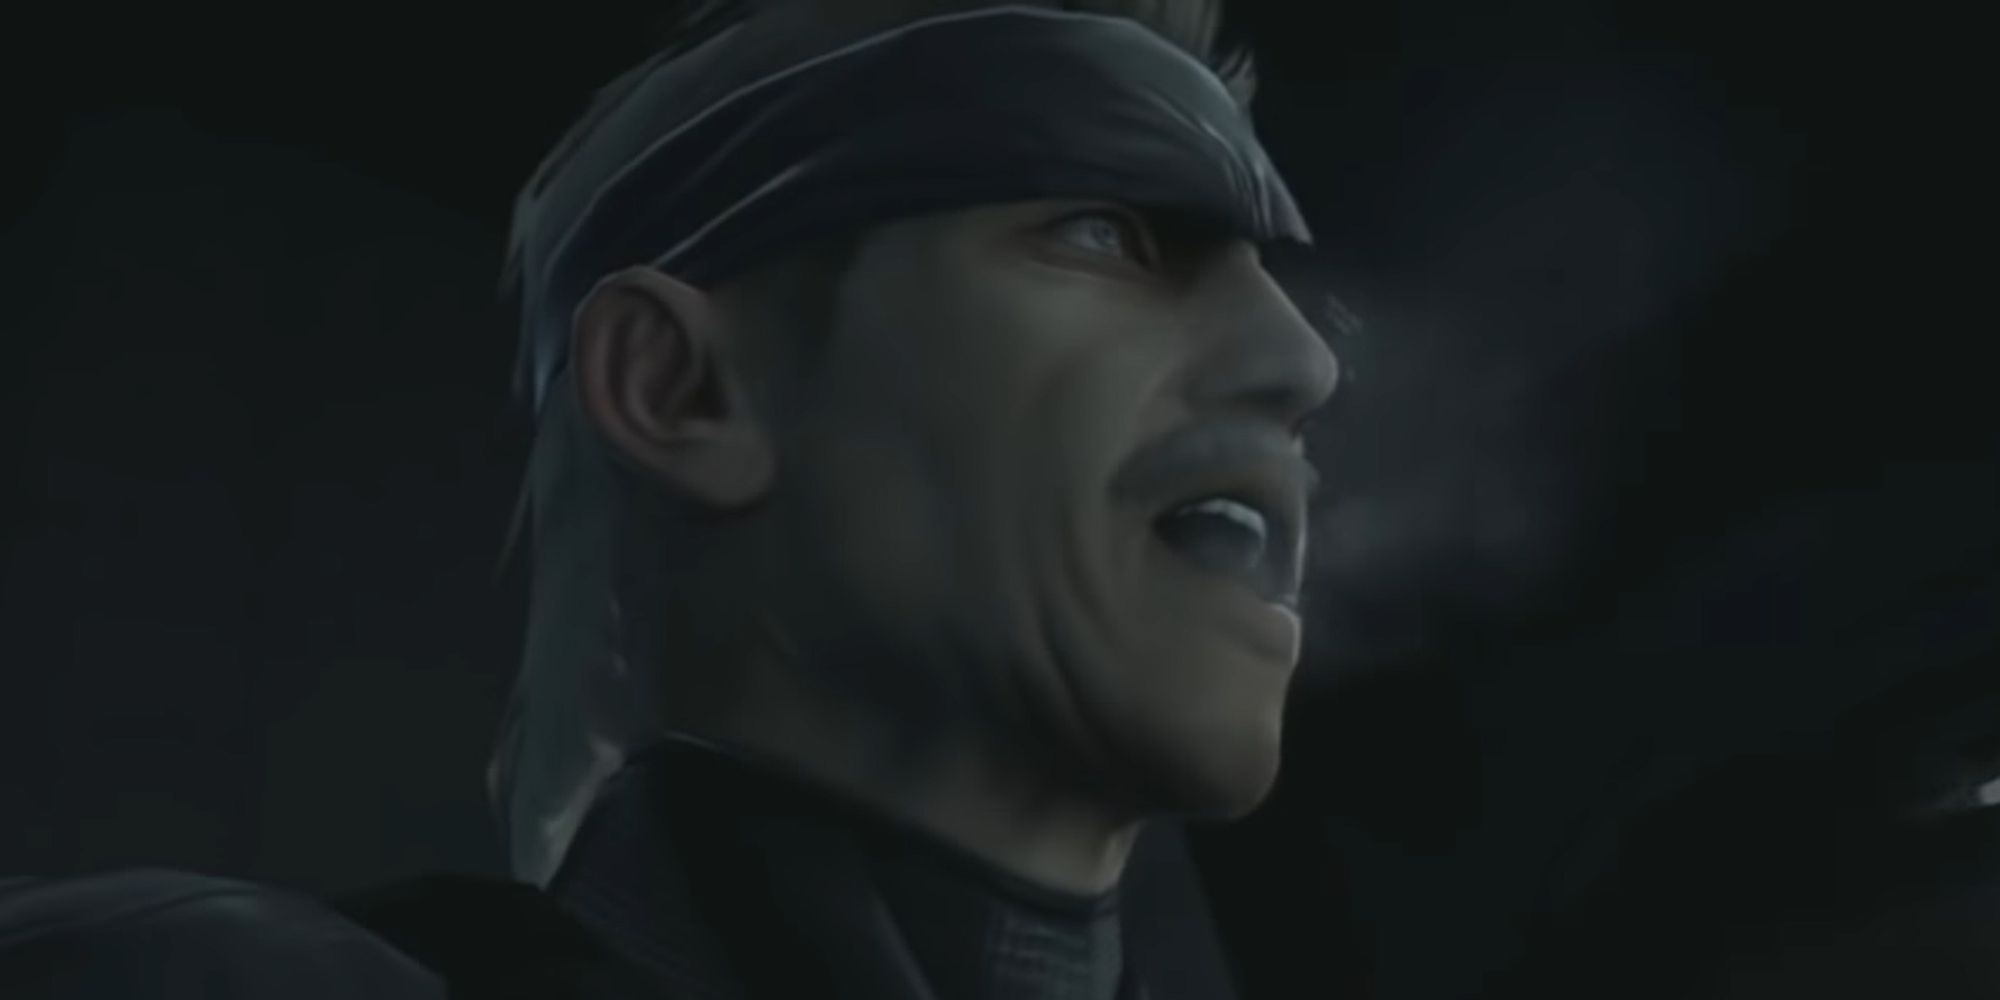 Metal Gear Solid 4 Screenshot Of Old Snake Waking Up From Dream